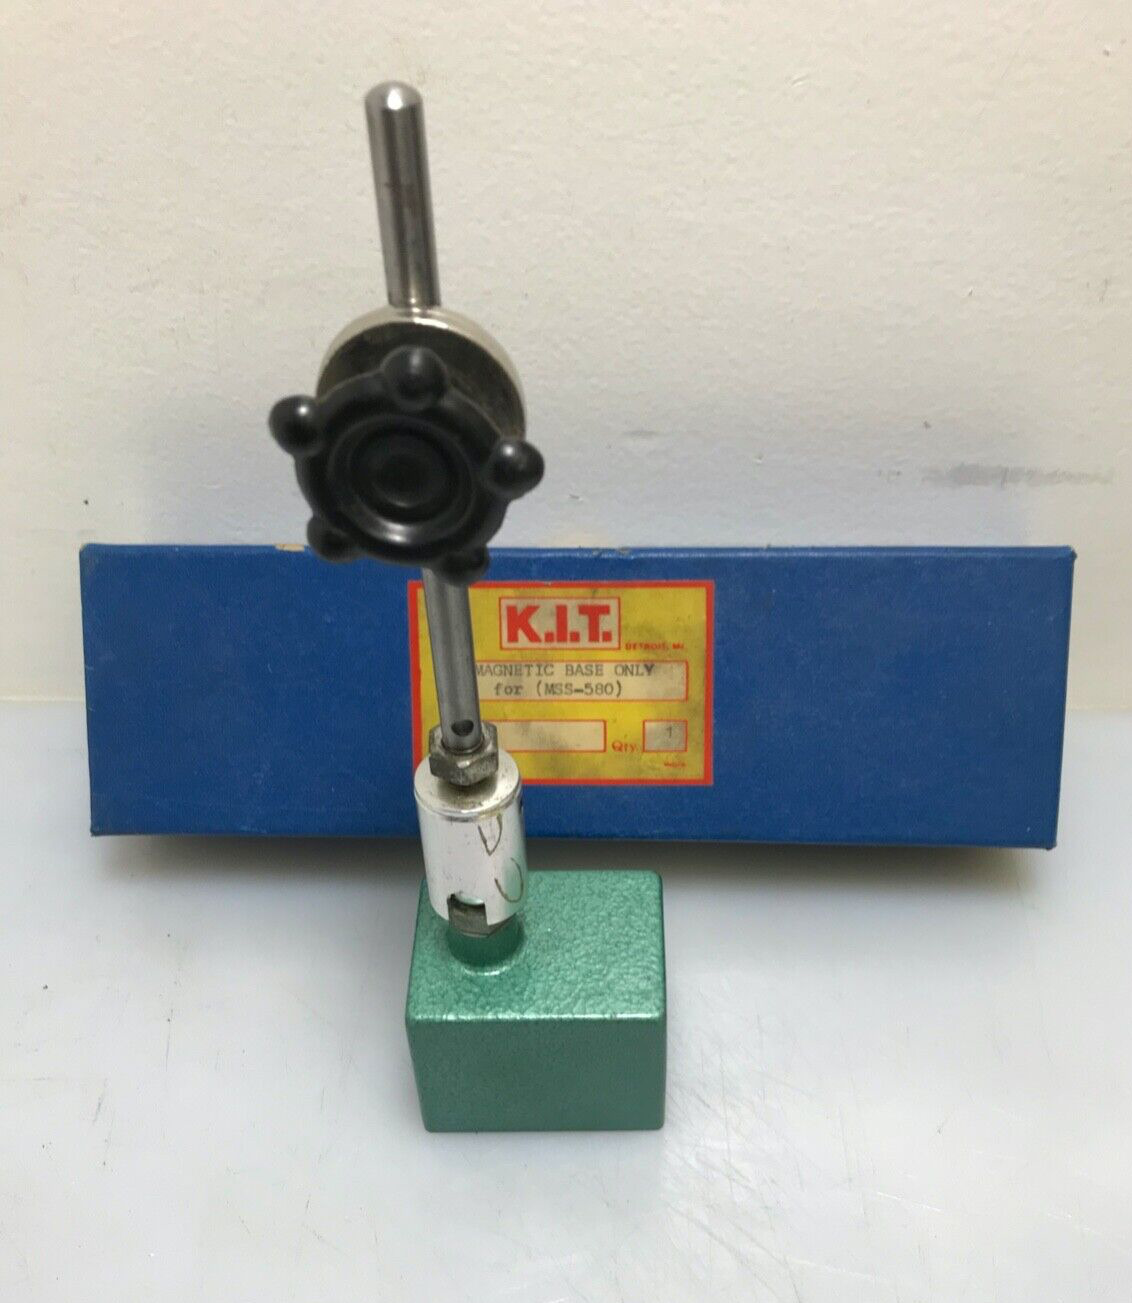 1950’s Rare Magnetic Base. Detroit, MI Company Called K.I.T. Never In Service